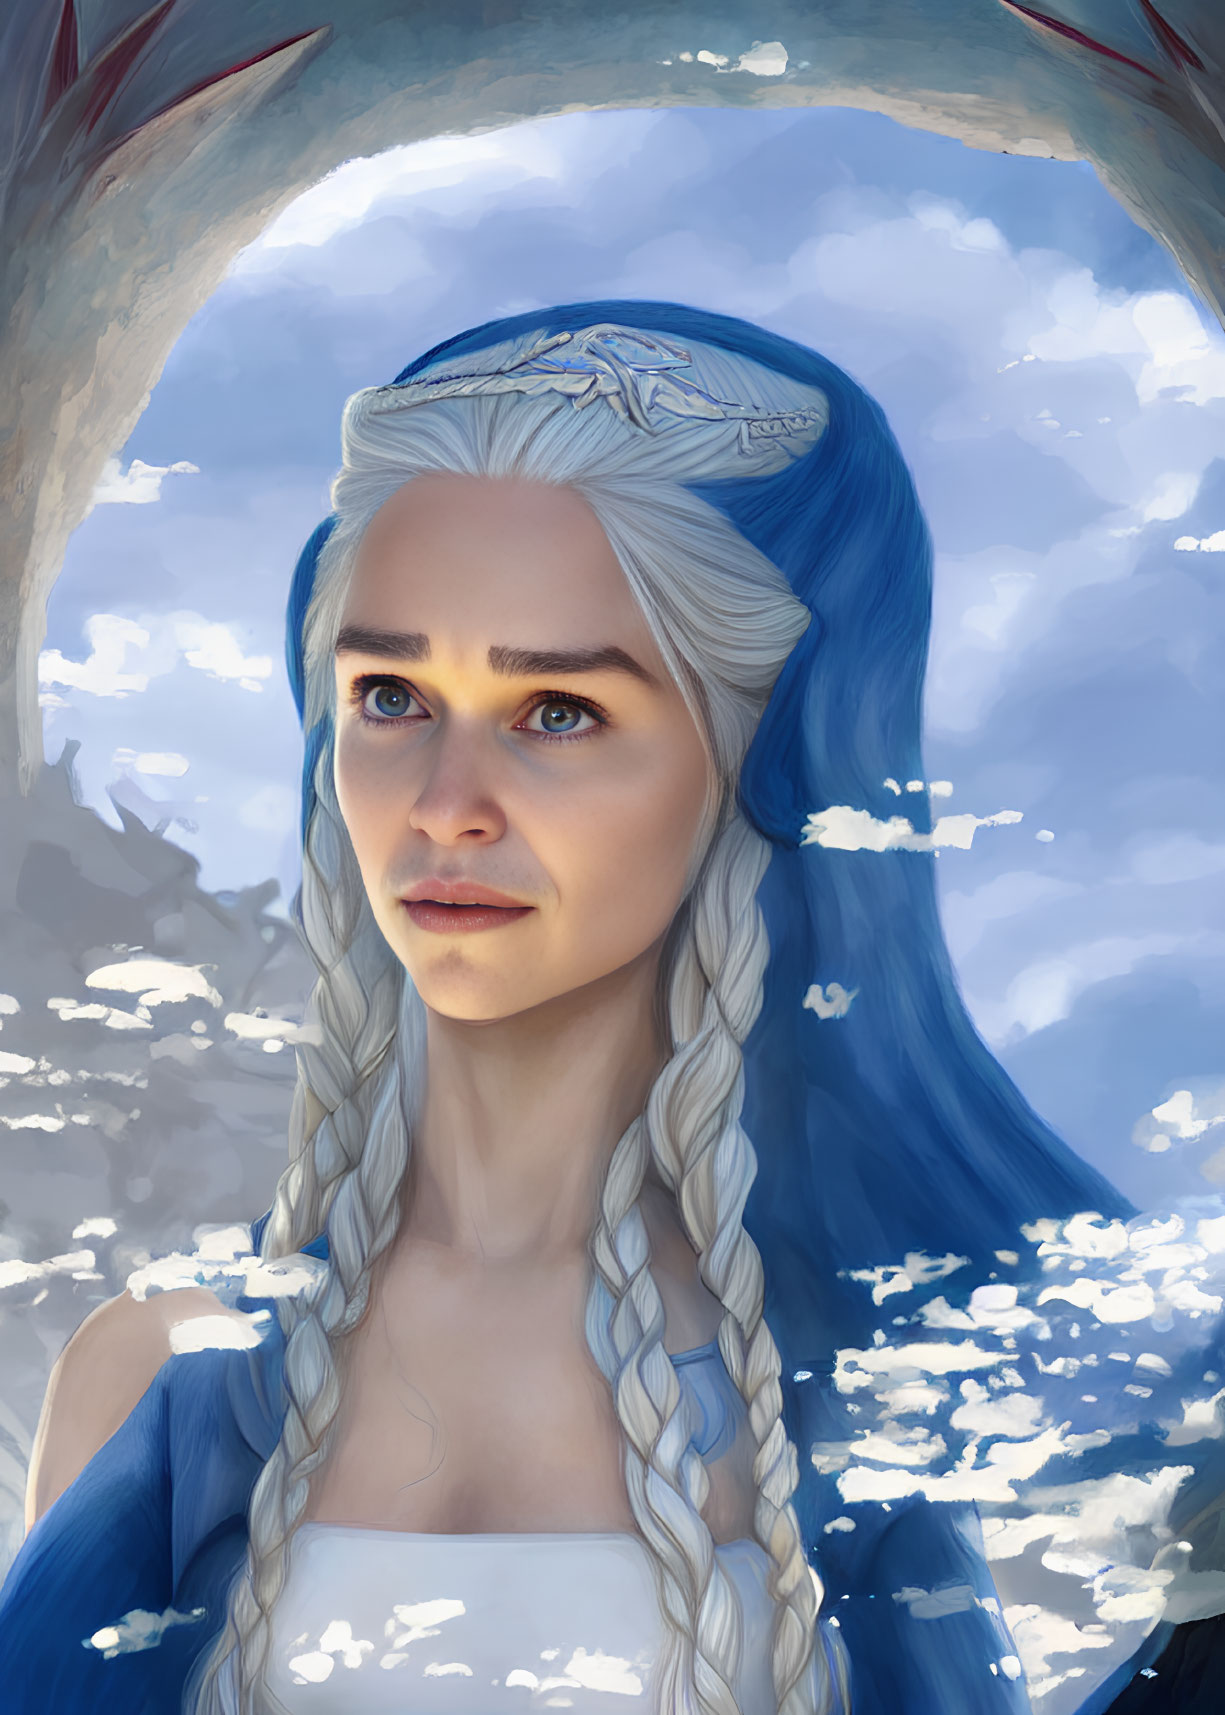 Pale-skinned woman with long braided white hair and blue headpiece gazes up at dragon silhouette